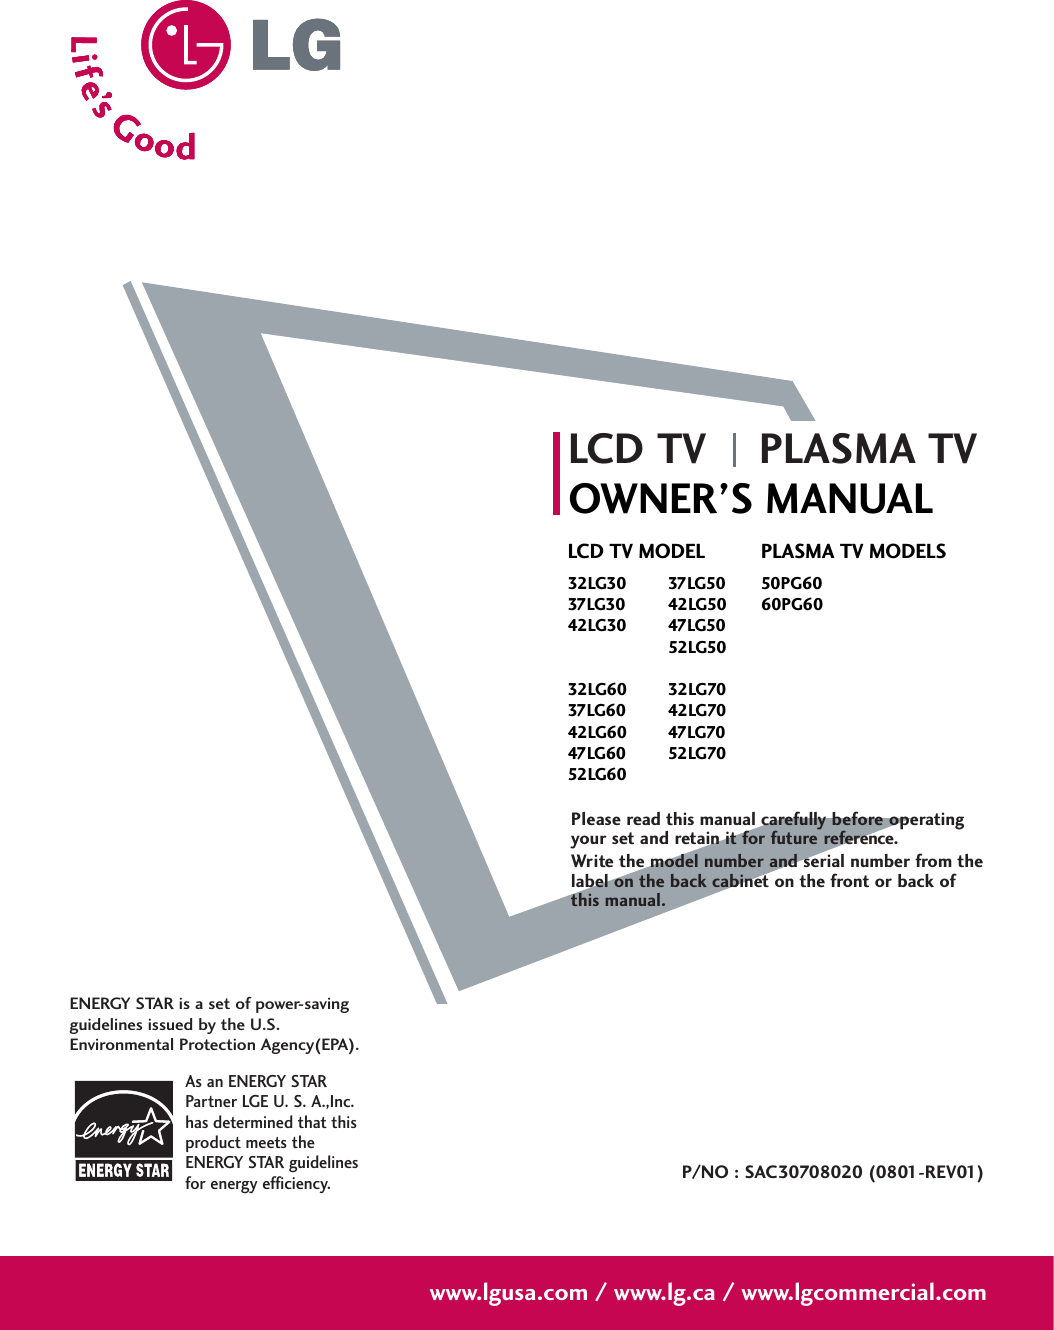 Please read this manual carefully before operatingyour set and retain it for future reference.Write the model number and serial number from thelabel on the back cabinet on the front or back ofthis manual. LCD TV PLASMA TVOWNER’S MANUALLCD TV MODEL32LG30 37LG5037LG30 42LG5042LG30 47LG5052LG5032LG60 32LG7037LG60 42LG7042LG60 47LG7047LG60 52LG7052LG60PLASMA TV MODELS50PG6060PG60P/NO : SAC30708020 (0801-REV01)www.lgusa.com / www.lg.ca / www.lgcommercial.comAs an ENERGY STARPartner LGE U. S. A.,Inc.has determined that thisproduct meets theENERGY STAR guidelinesfor energy efficiency.ENERGY STAR is a set of power-savingguidelines issued by the U.S.Environmental Protection Agency(EPA).